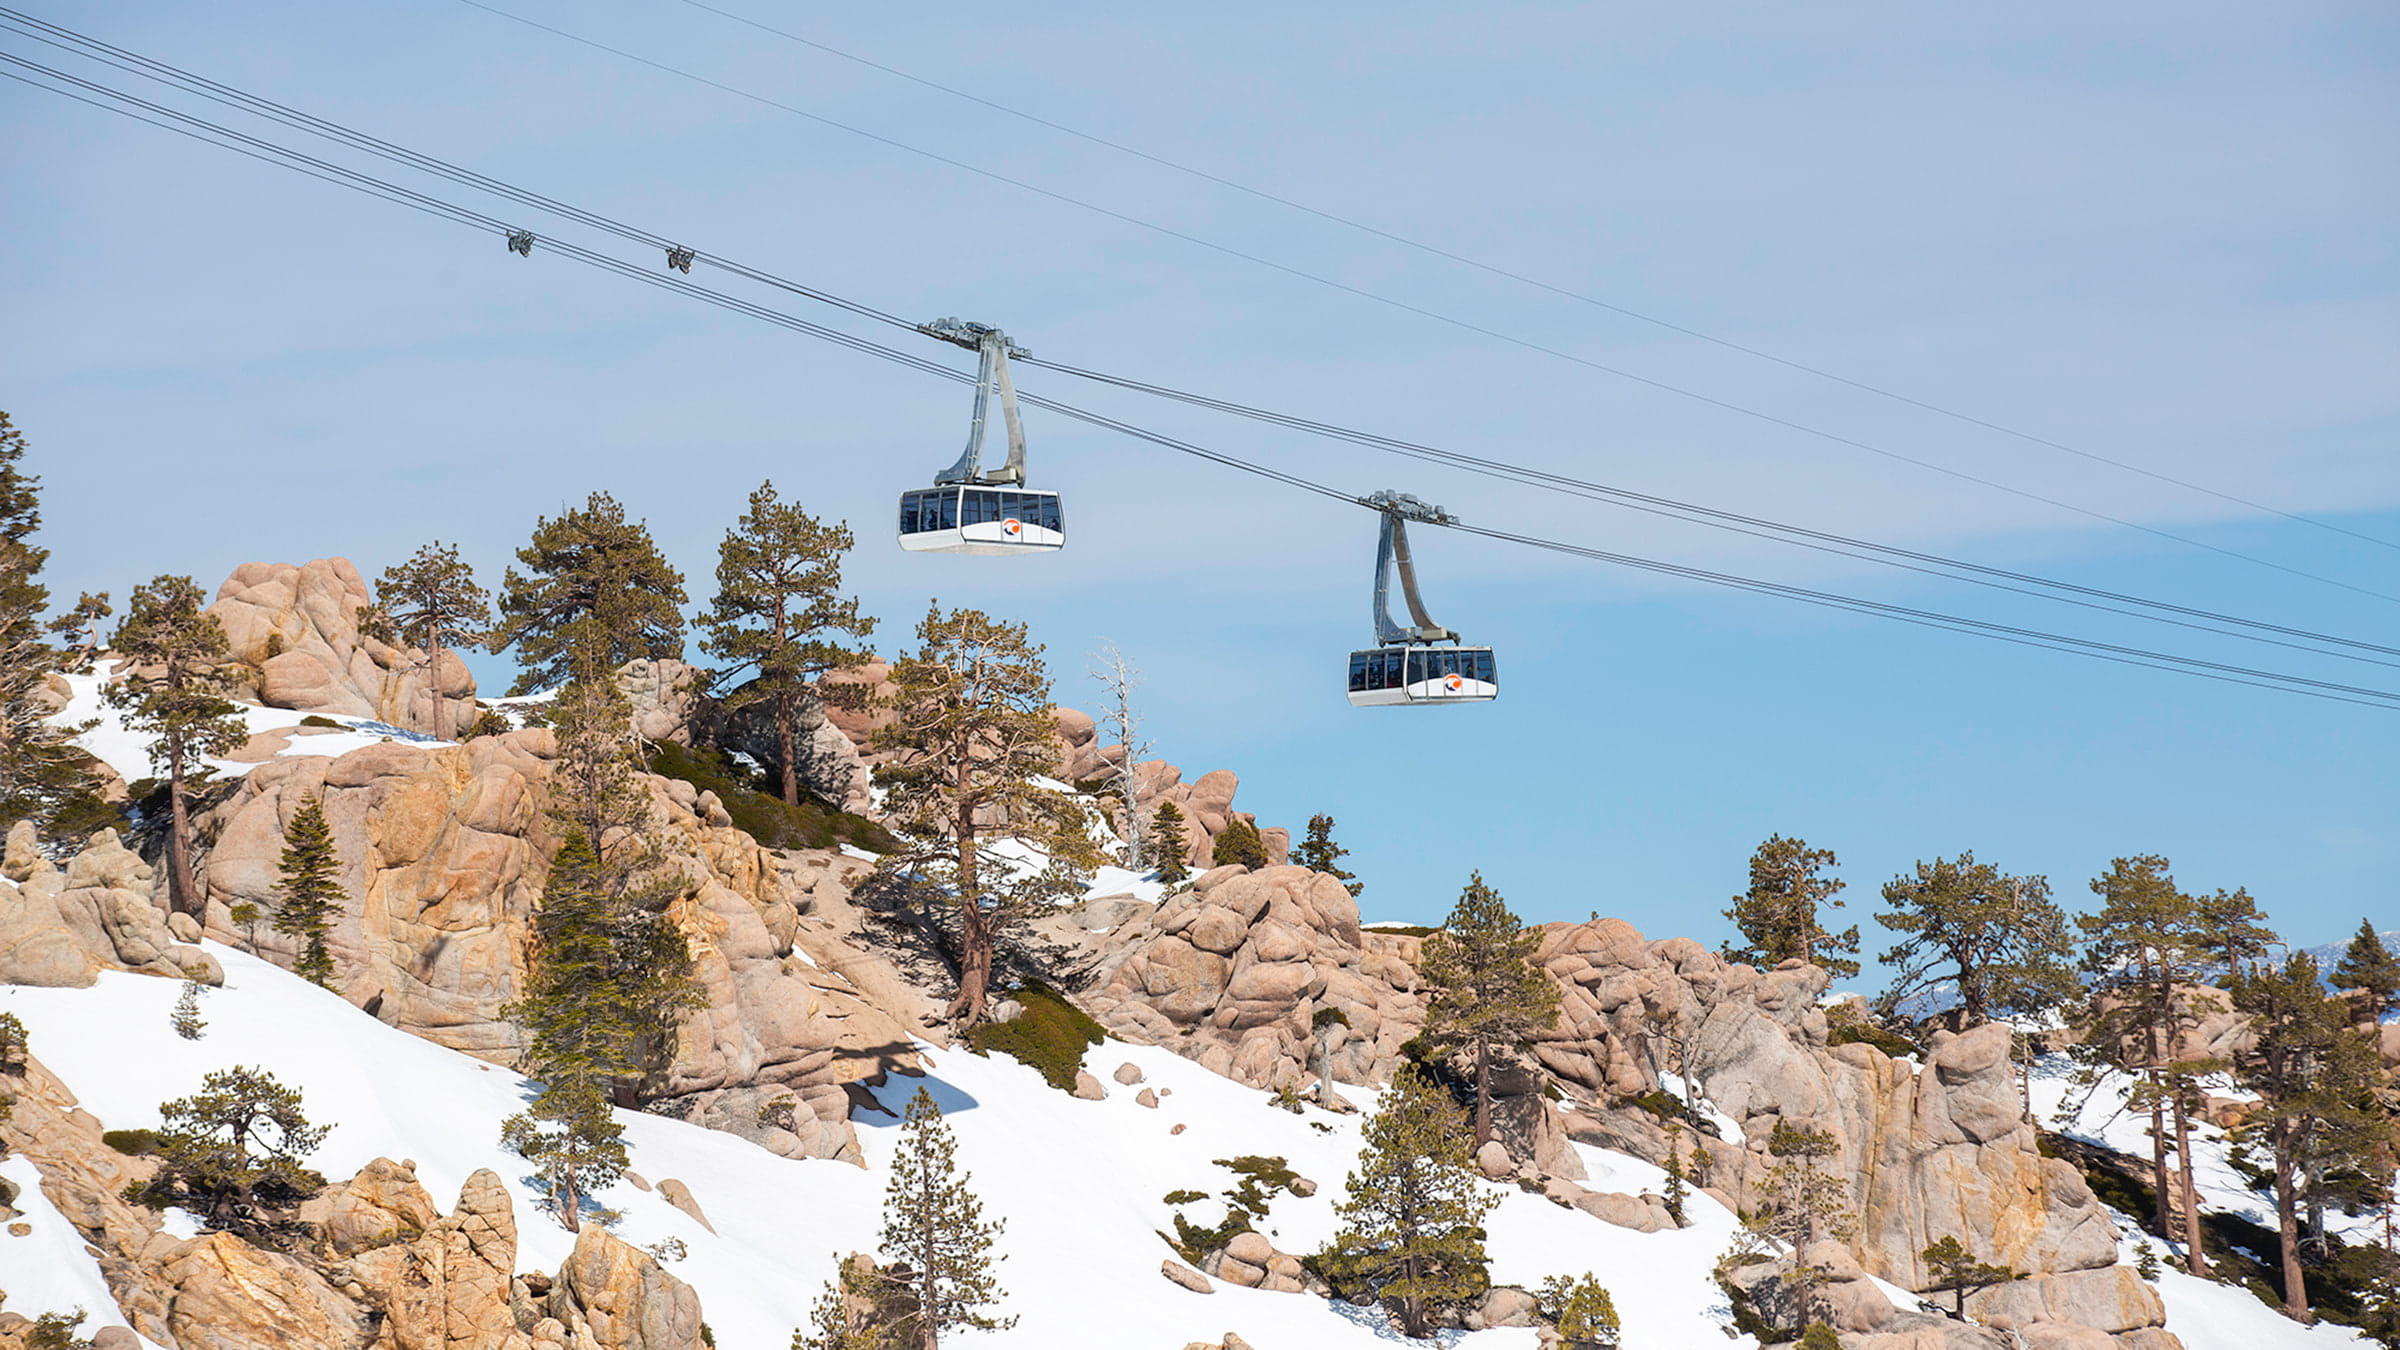 The Aerial Tram at Palisades Tahoe is open Nov 24-28 for sightseeing